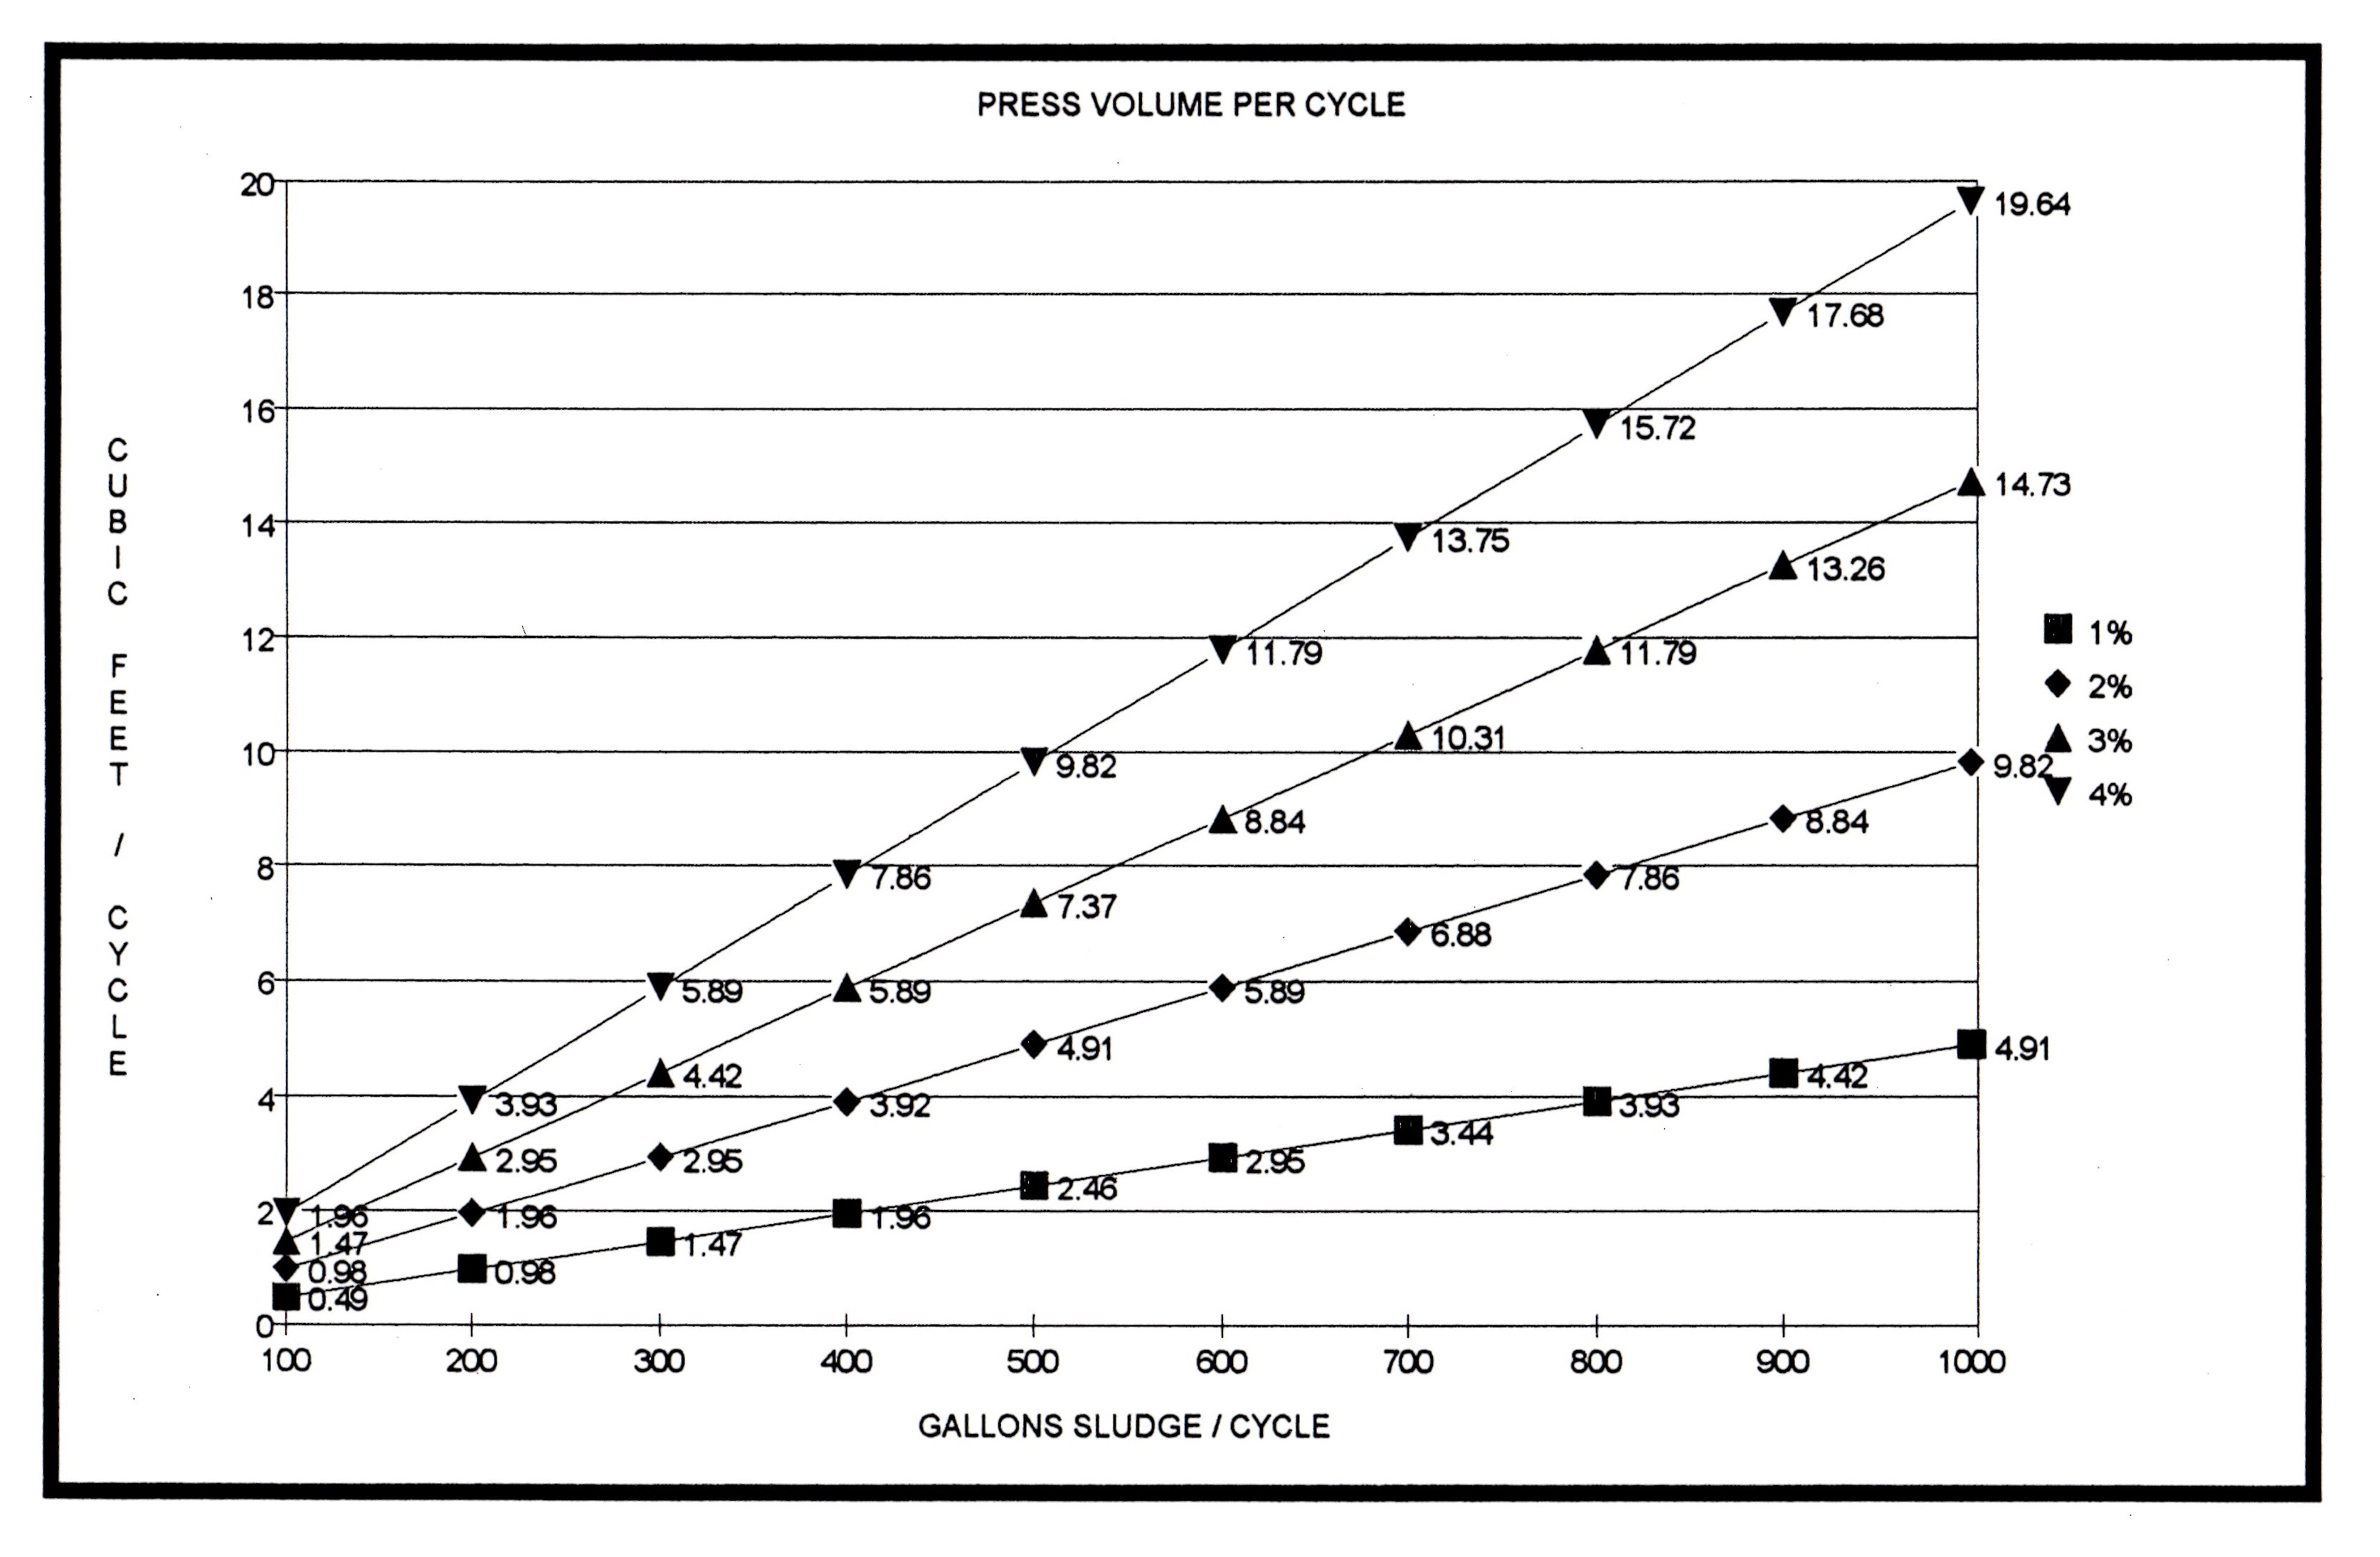 Filter Press Volume per Cycle for Thin Slurries